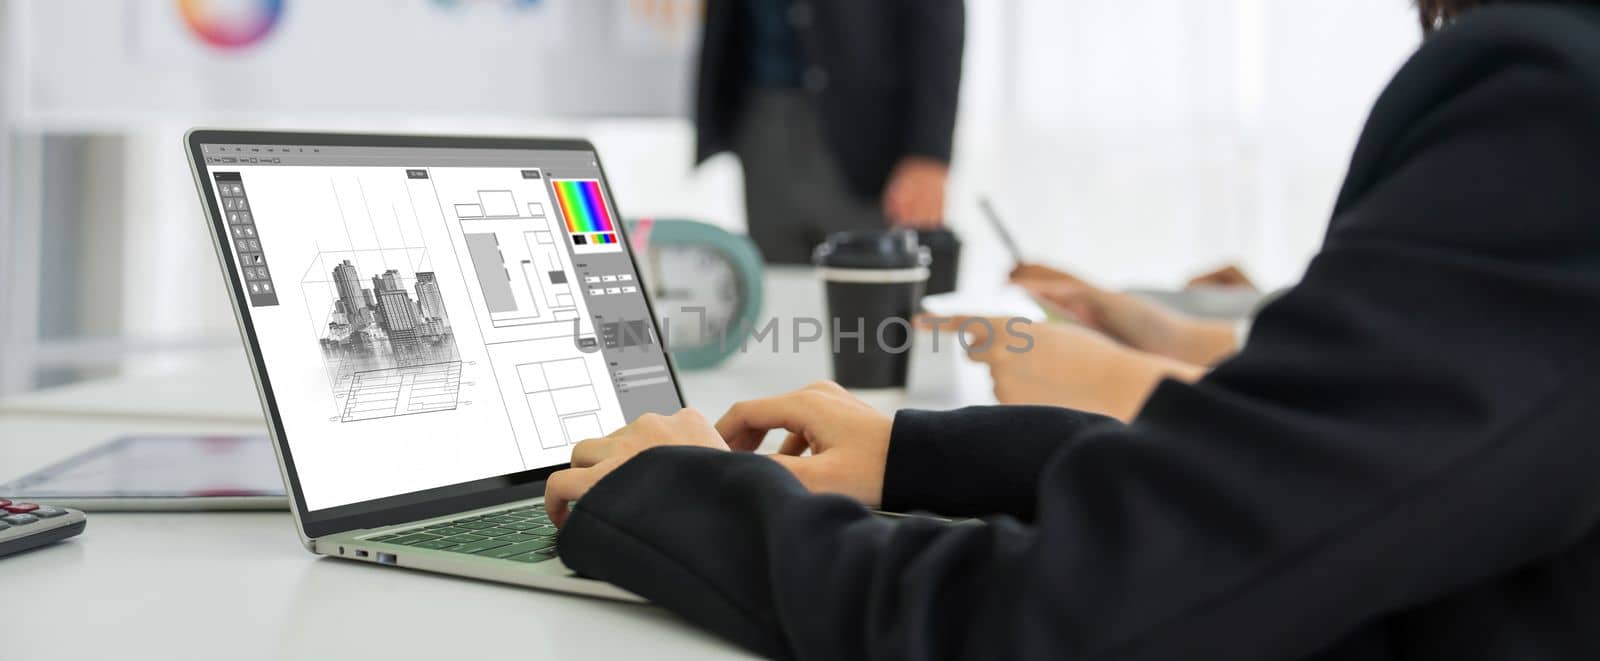 Architectural design modish software application for architect business by biancoblue